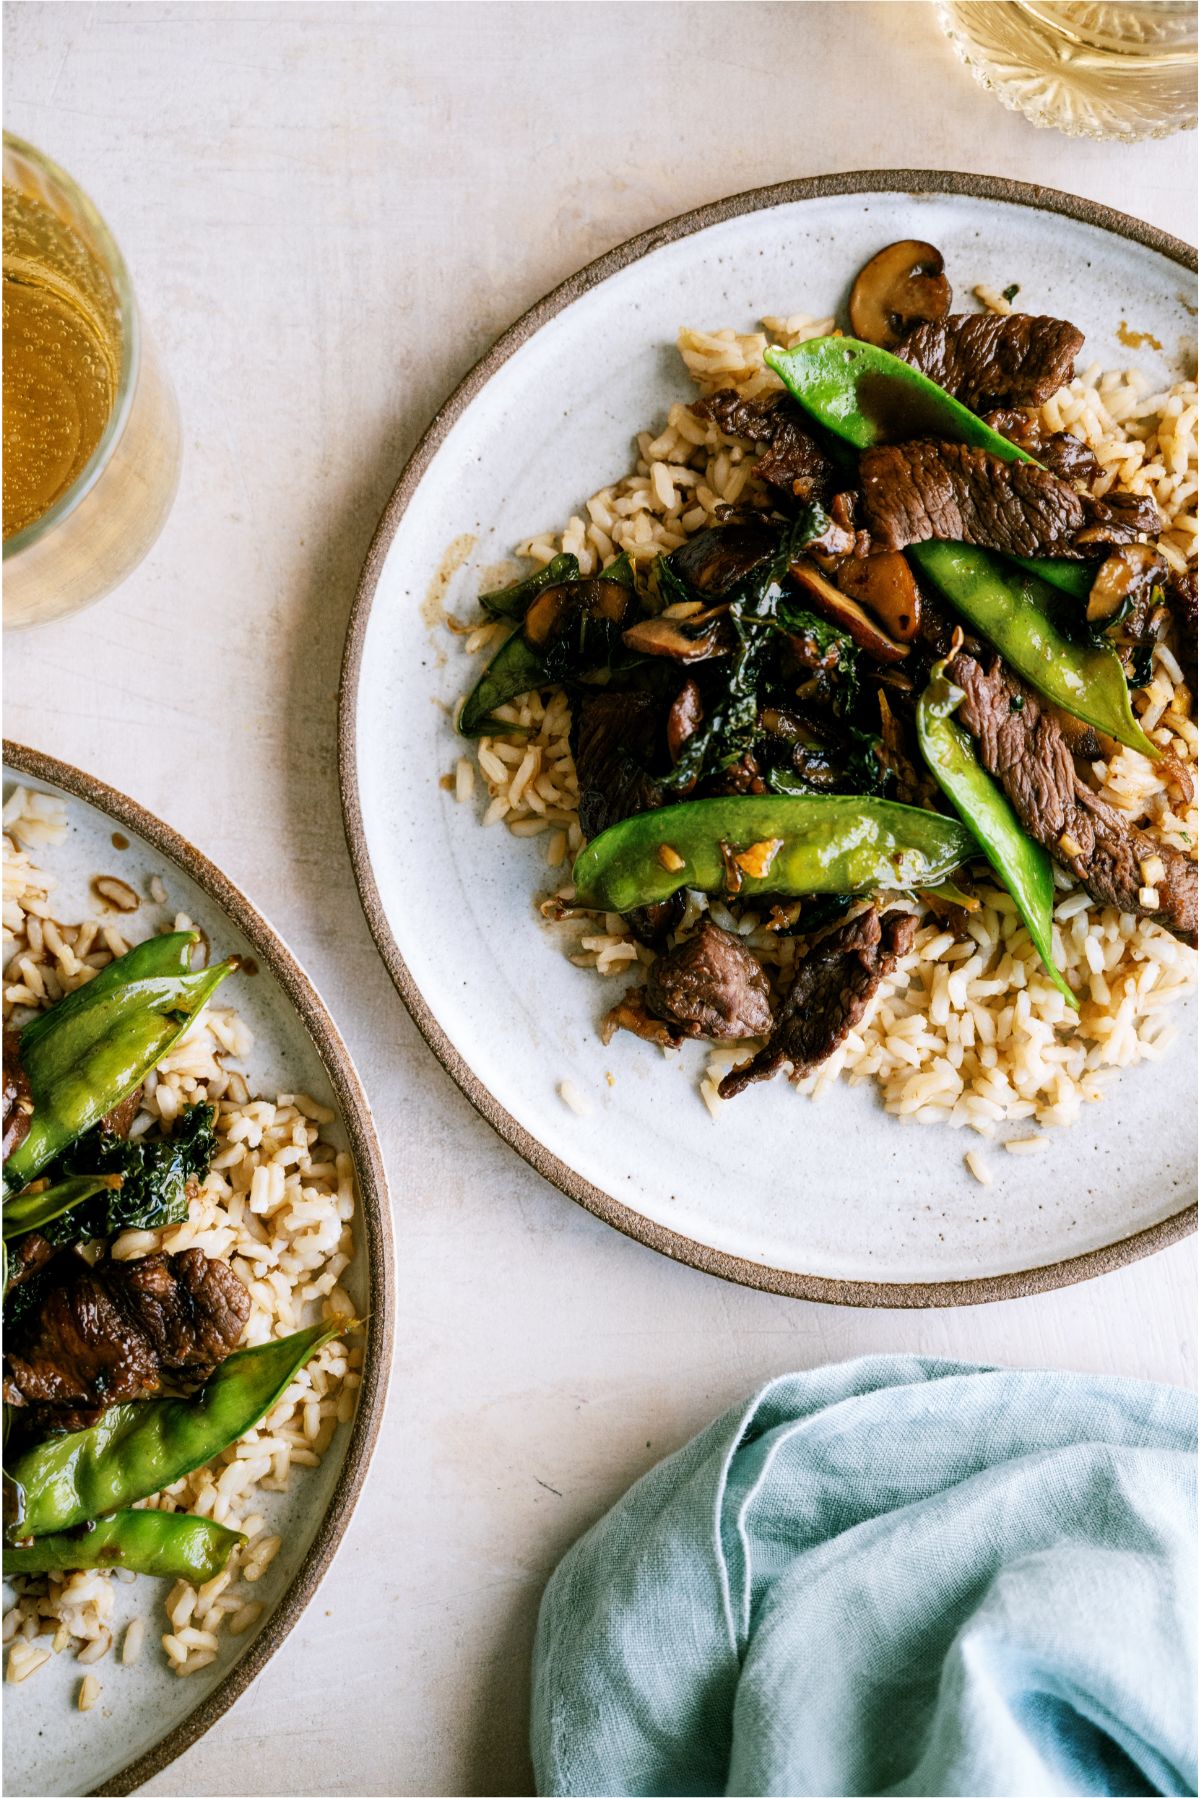 Two plated of Asian Beef and Snow Peas served over rice